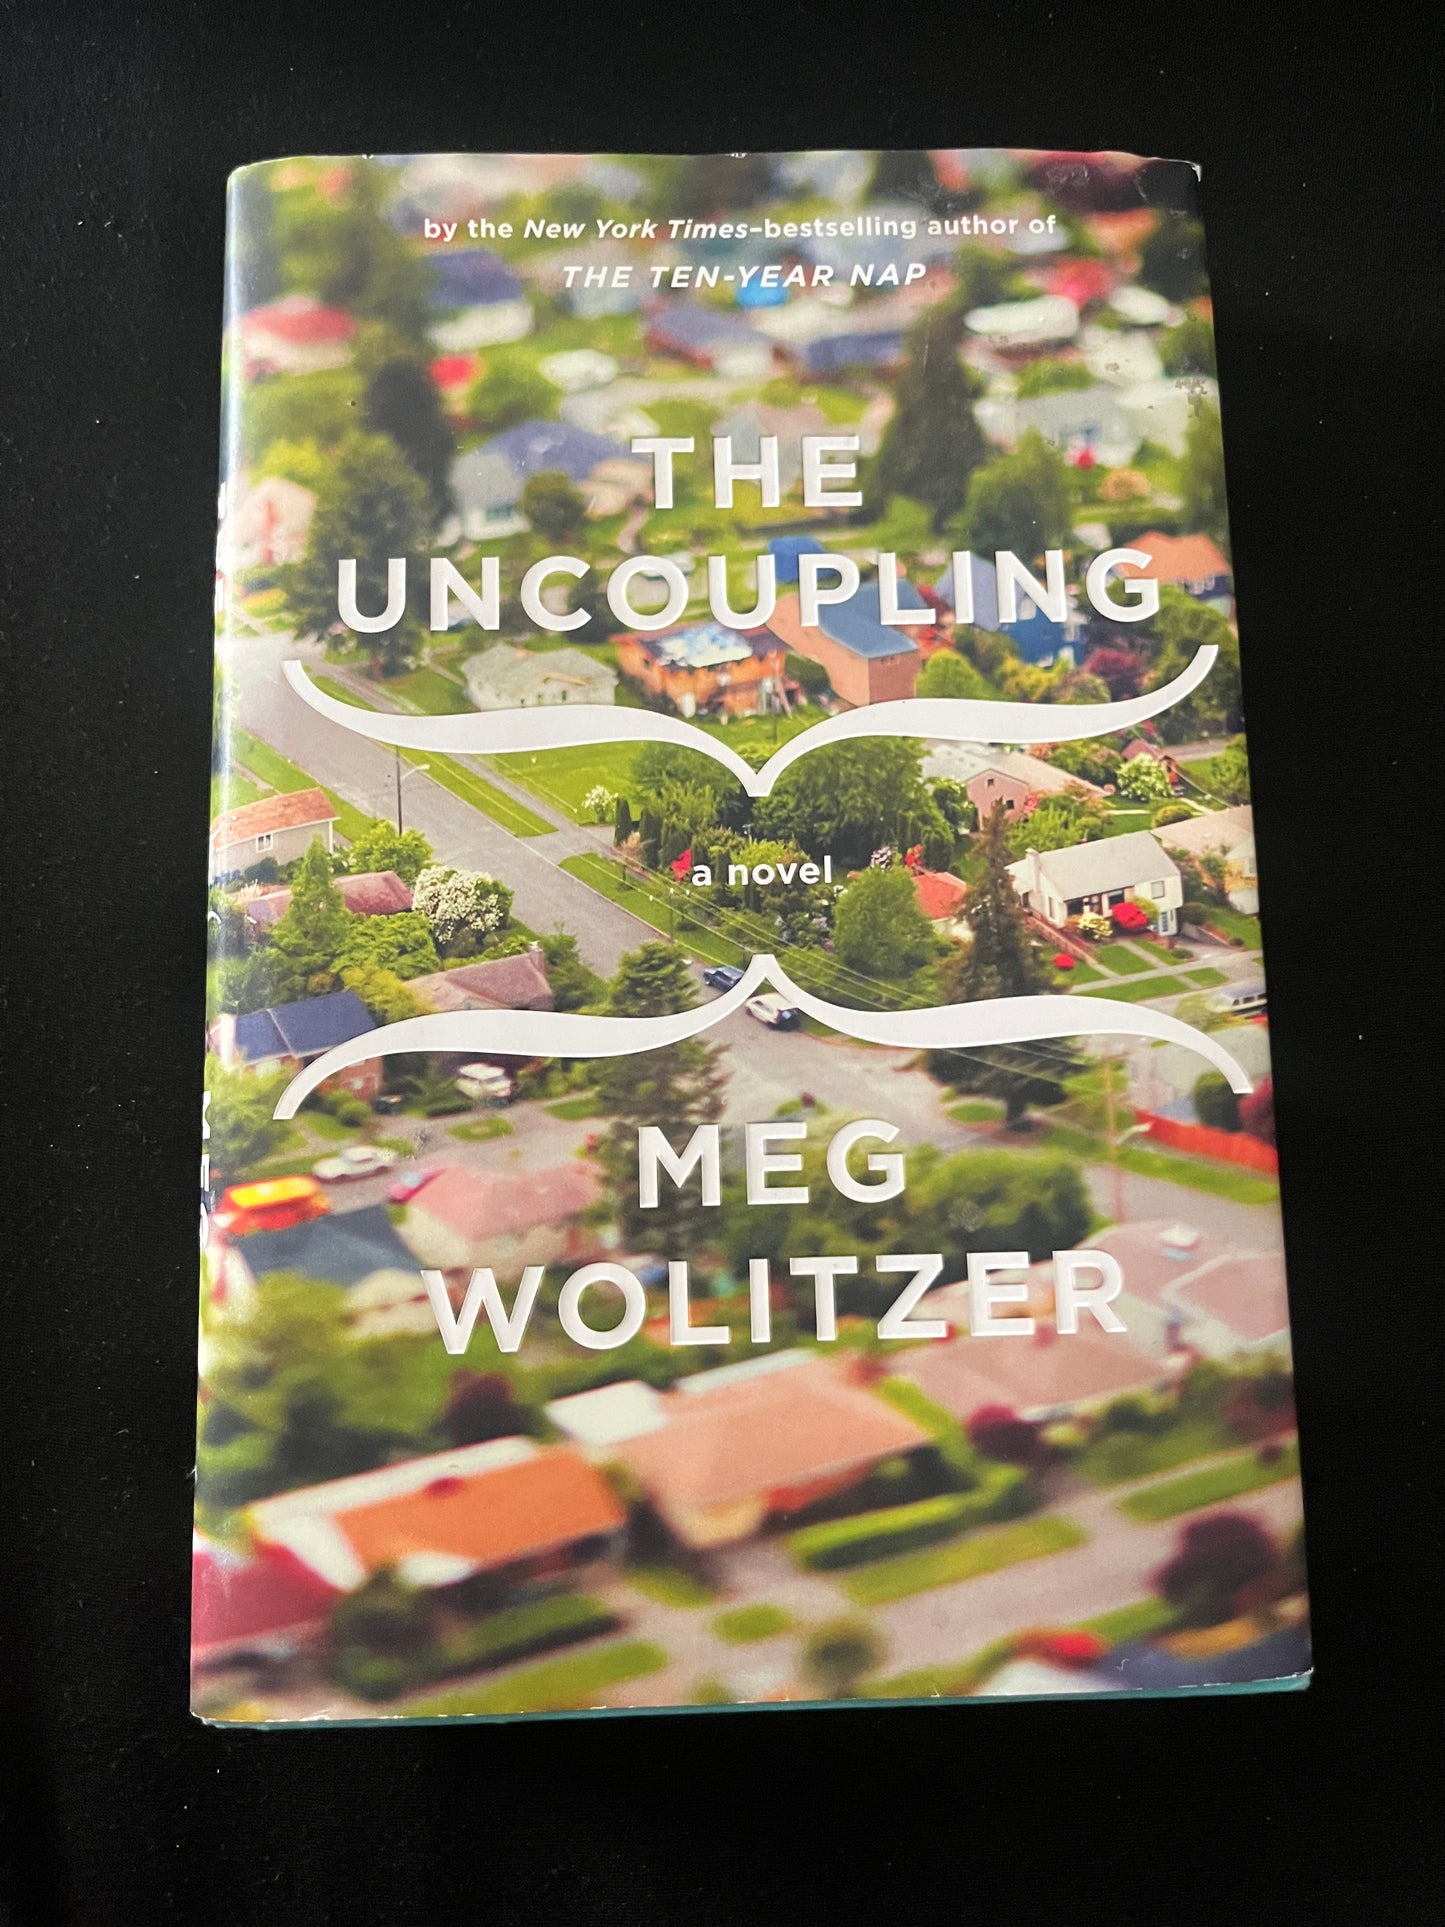 THE UNCOUPLING by Meg Wolitzer